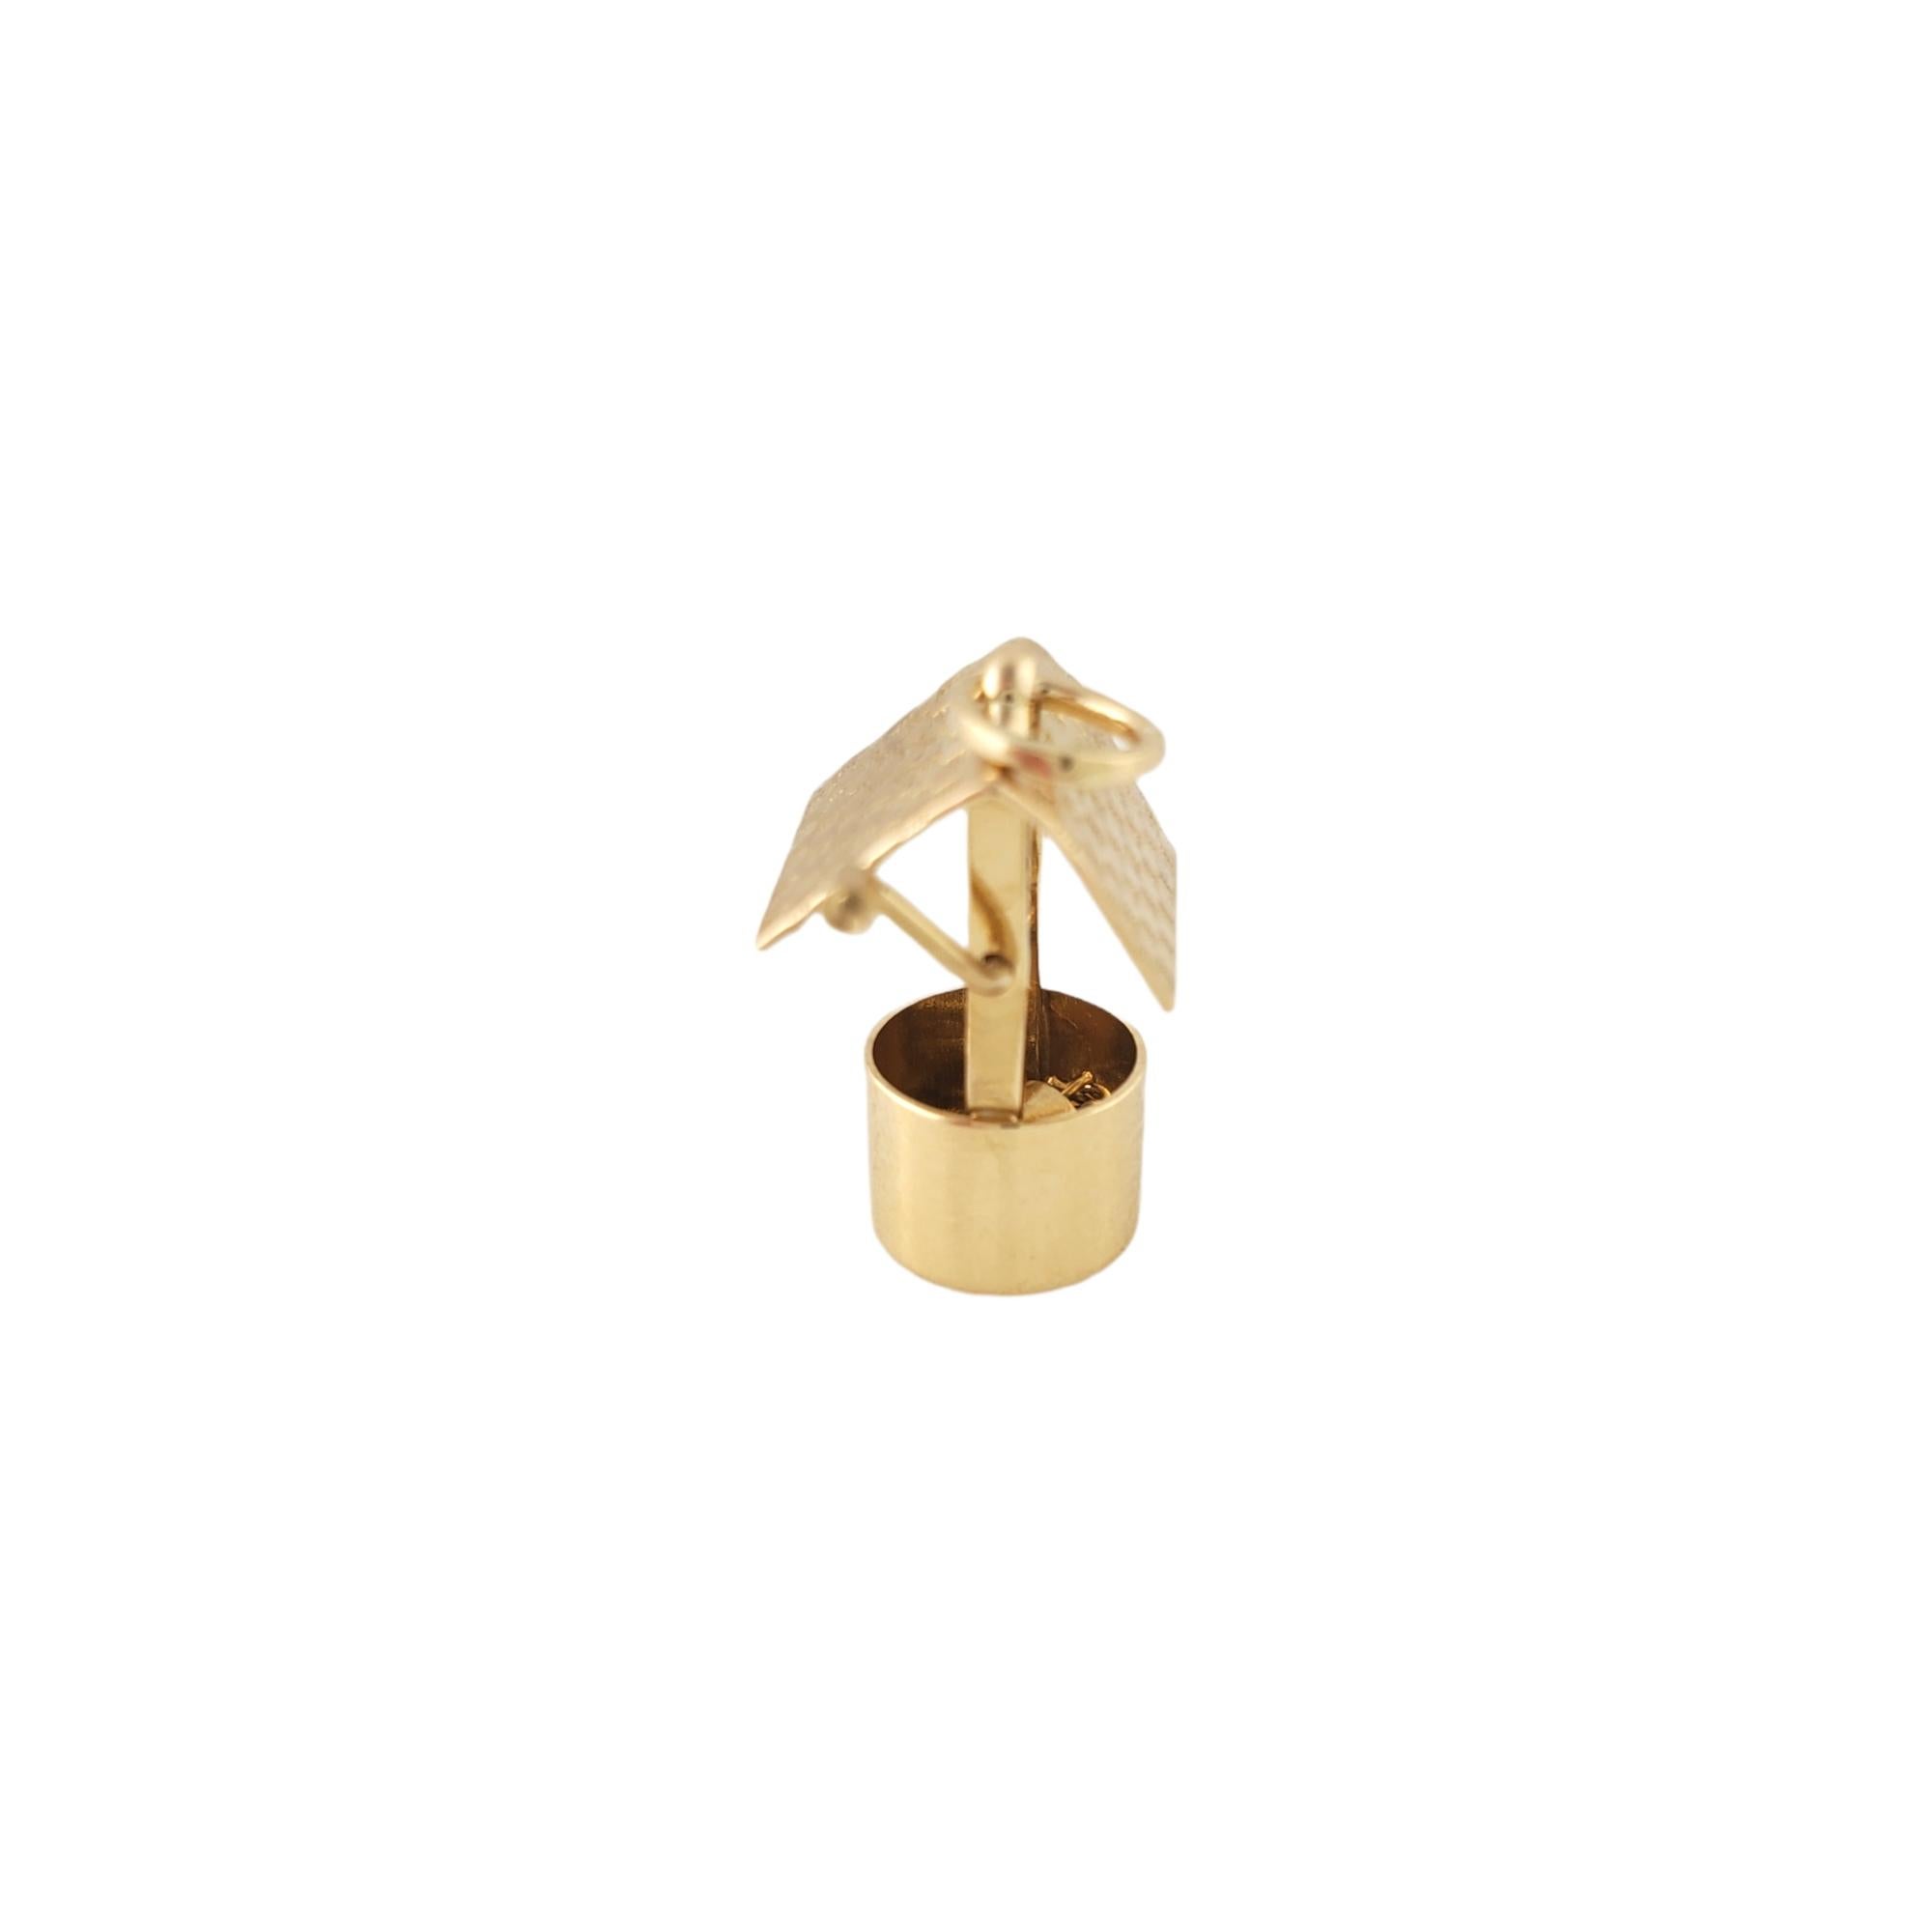 Vintage 14K Yellow Gold Watering Hut Charm

This lovely watering hut features a dangling chain and water bucket with 14K yellow gold details.

Size: 16 mm X 13 mm

Weight: 2.2 g/ 1.4 dwt

Hallmark: 14K

Very good condition, professionally